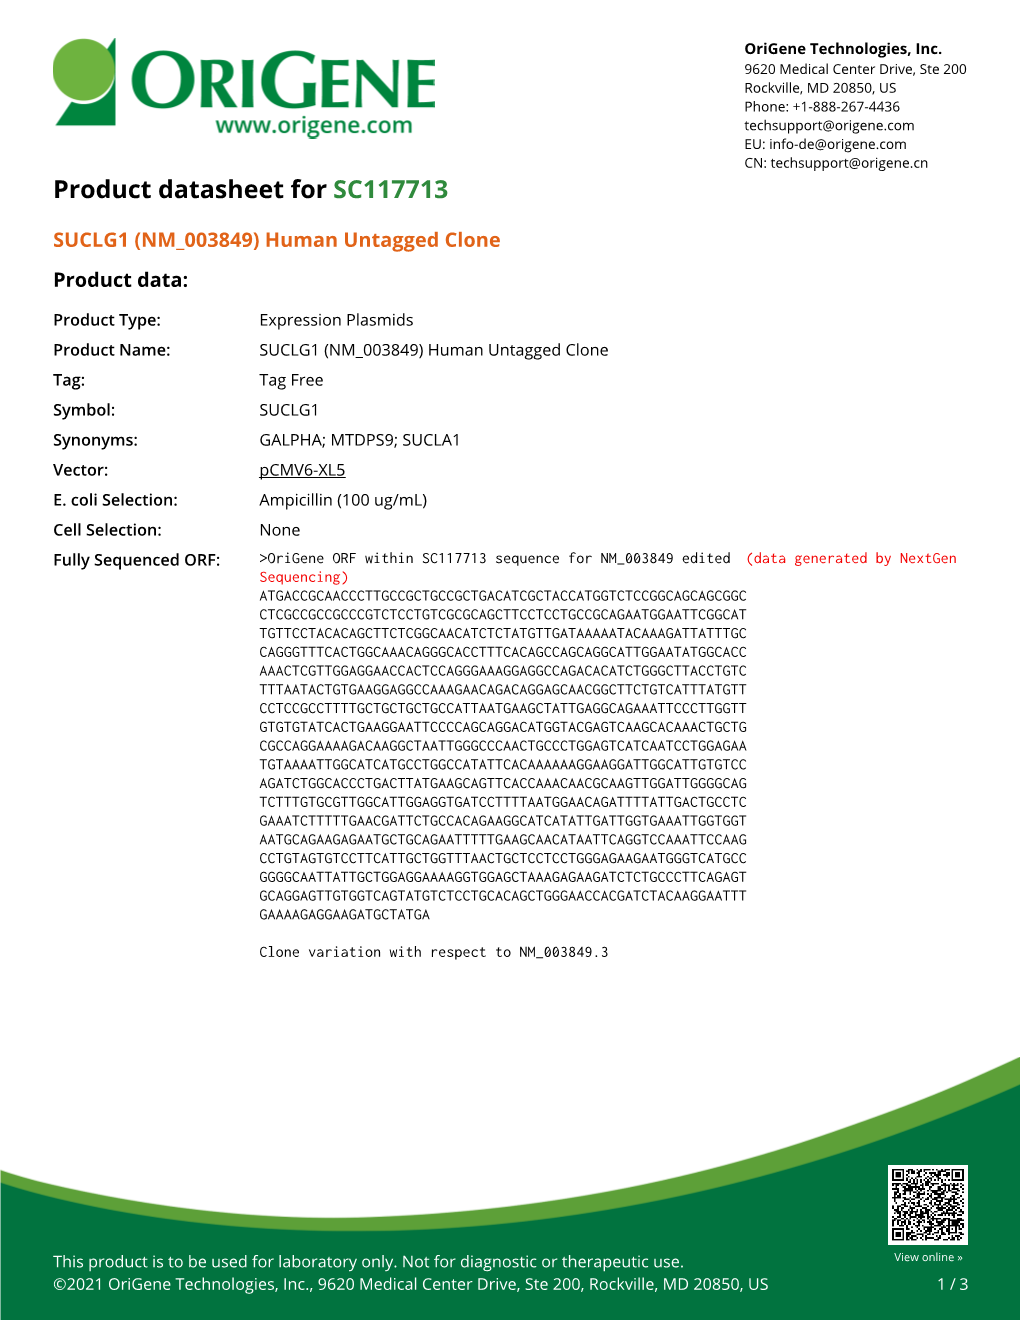 SUCLG1 (NM 003849) Human Untagged Clone Product Data